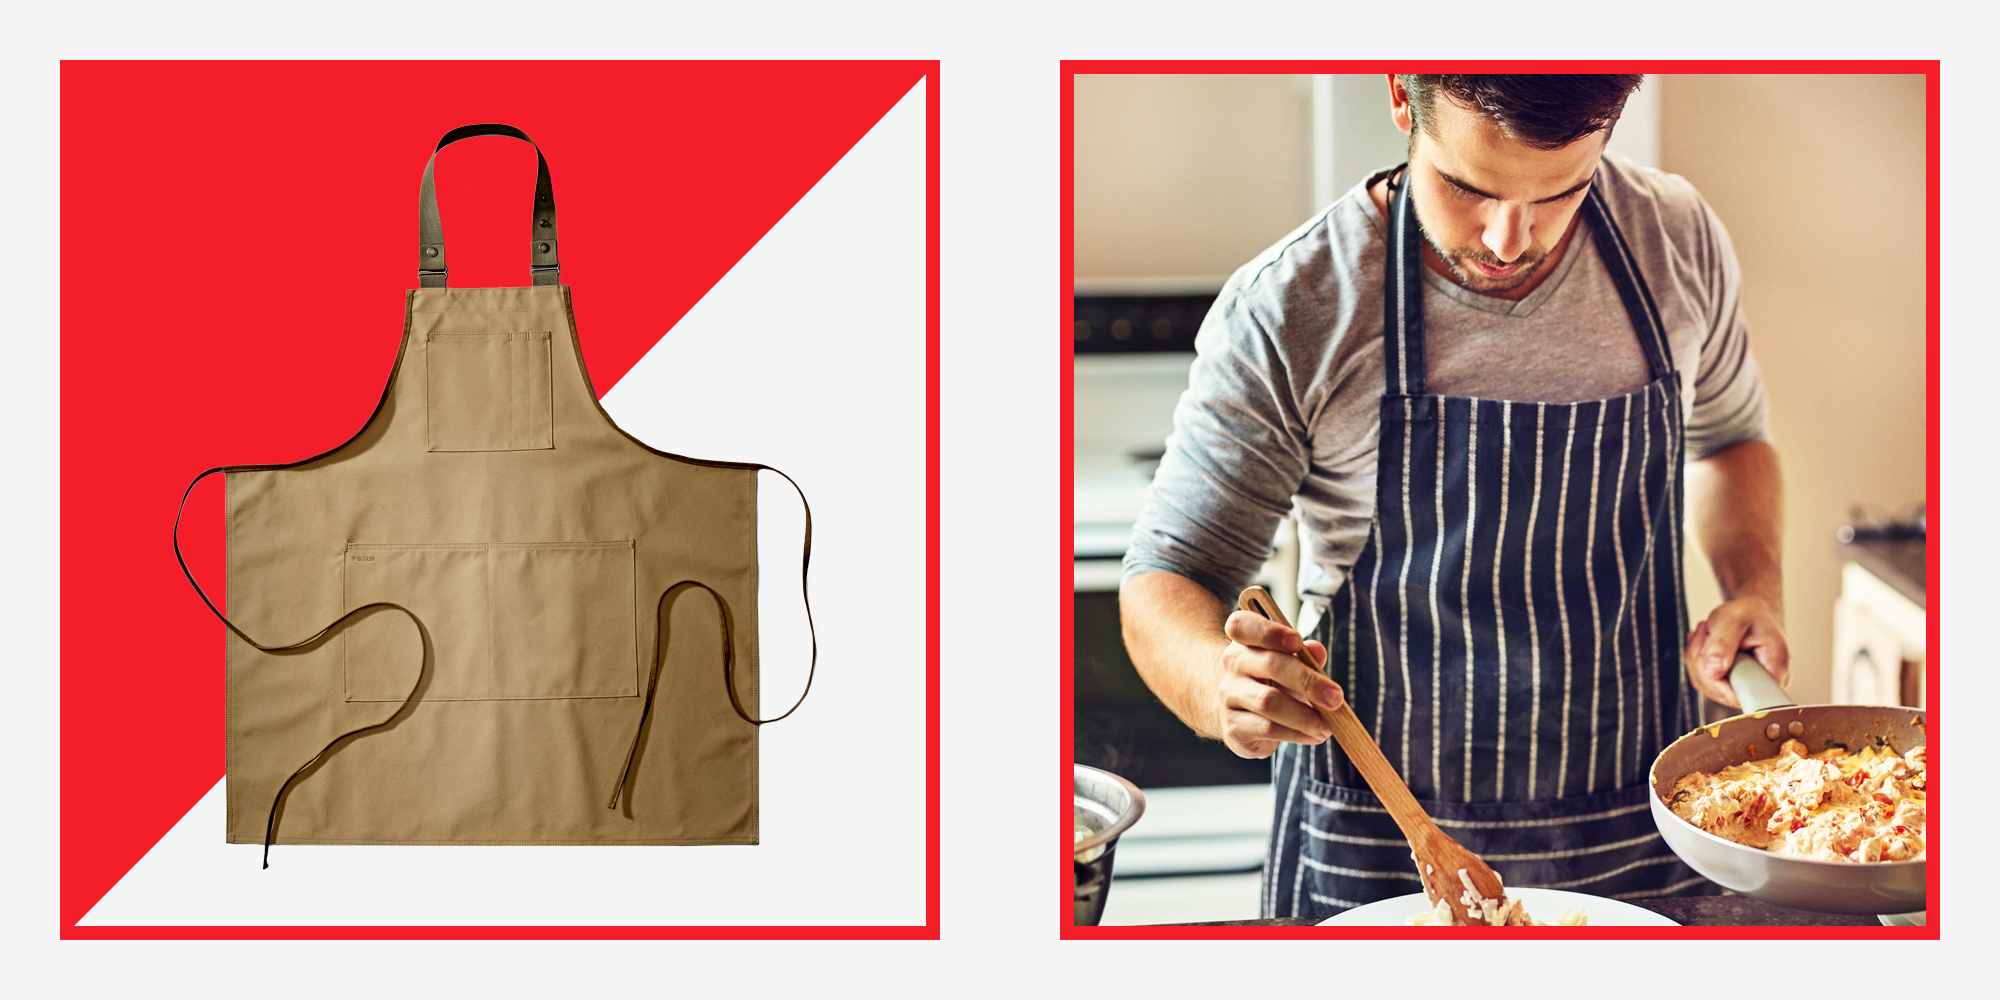 Personalized Initial Name Apron Kitchen Gifts for Women Man - Custom  Initial Design Chef Cooking BBQ Grill Baking Barbecue White Aprons - Cute  Gifts